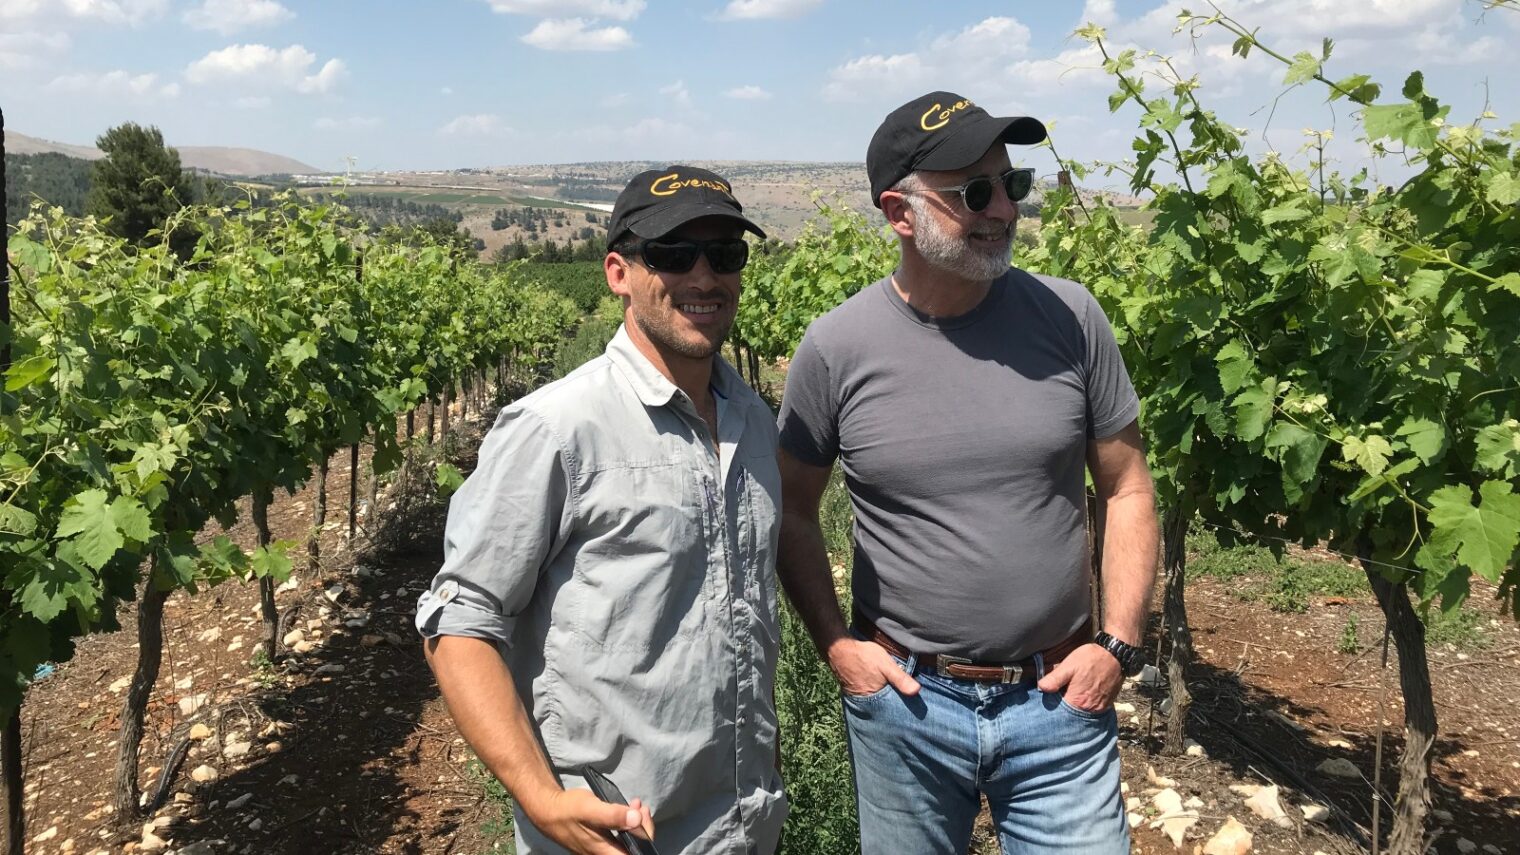 Covenant winemaker Ari Erle, left, and founder Jeff Morgan in an Israeli vineyard. Photo courtesy of Covenant Winery